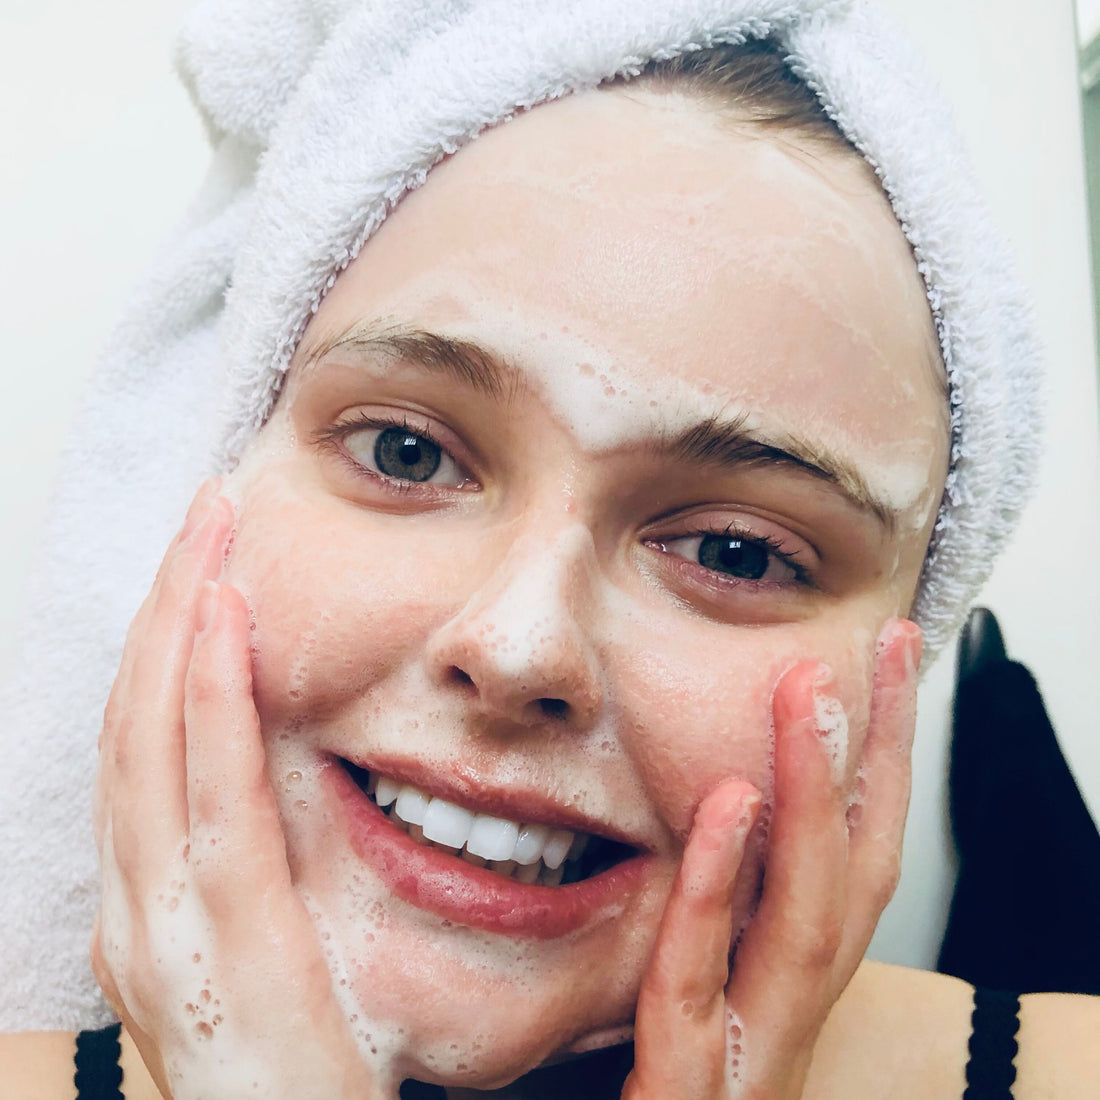 pretty girl smiling while washing her face with her hair in a towel and bubbly suds on her face 